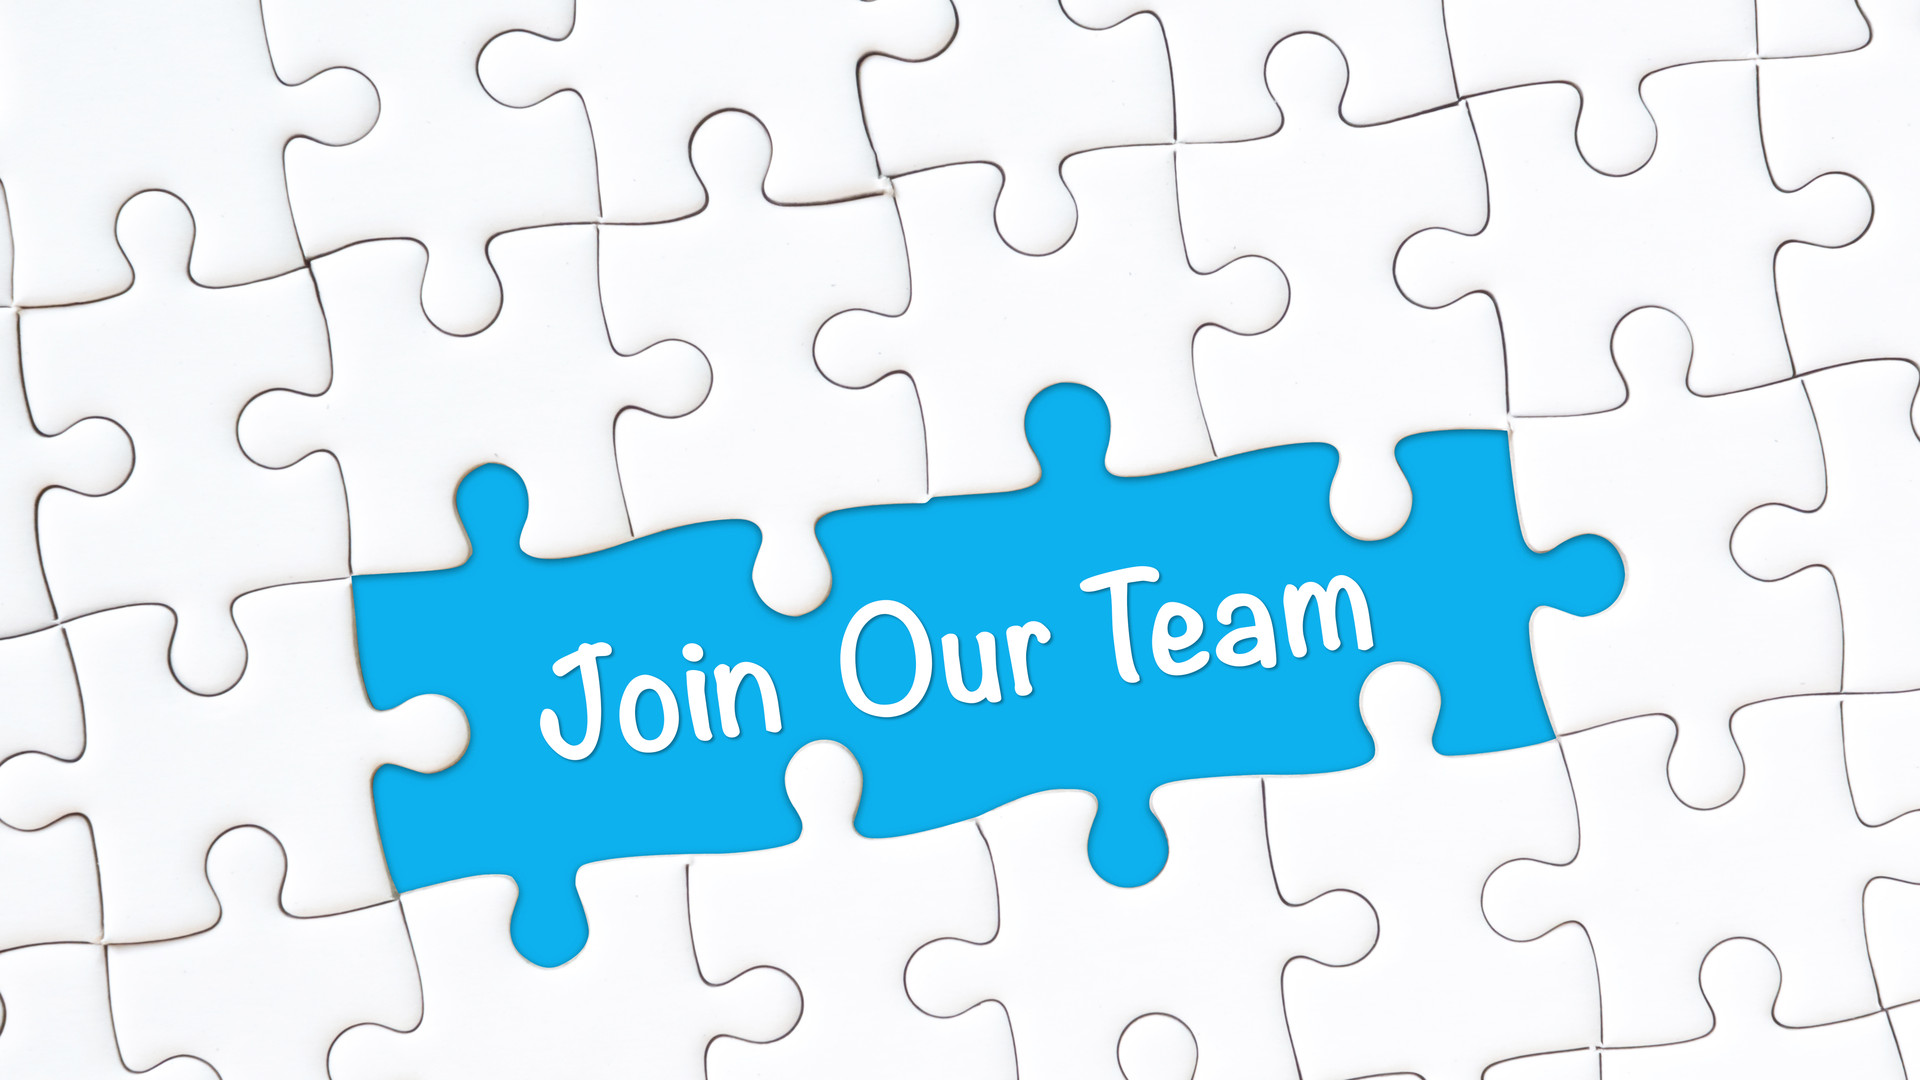 Join our team concept. White jigsaw puzzle with word and blue background